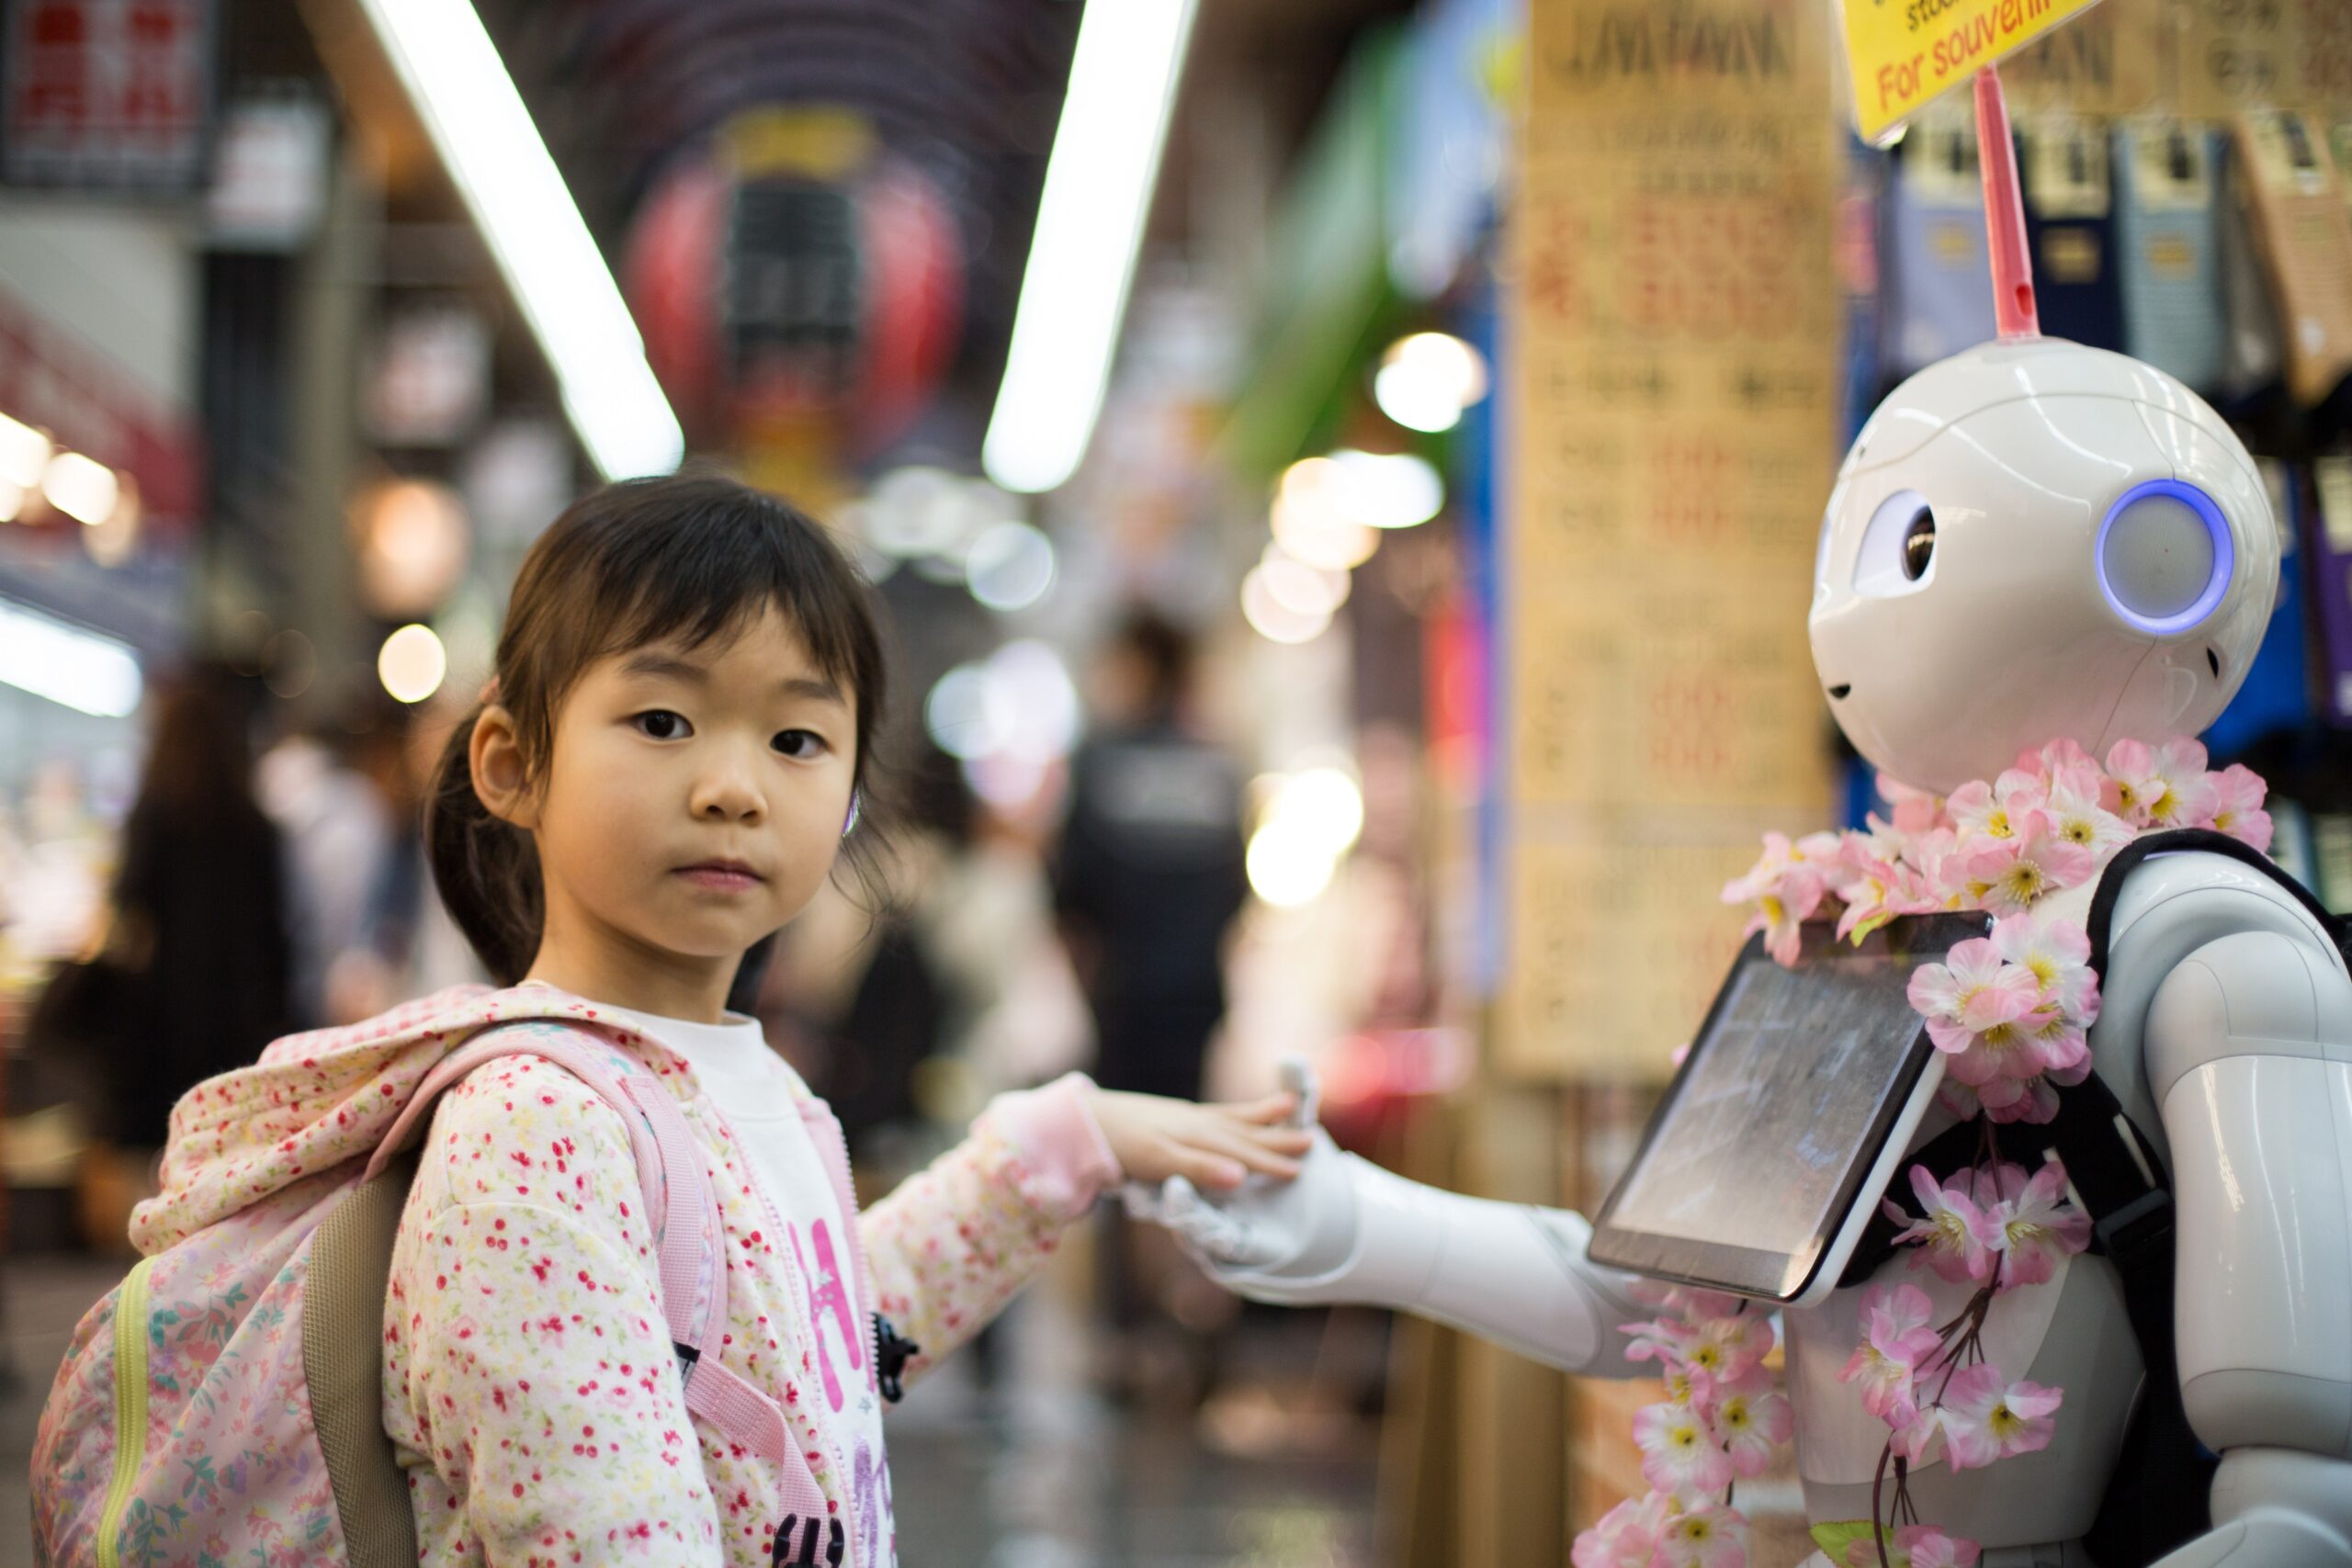 A girl greeting a robot in a Japanese market